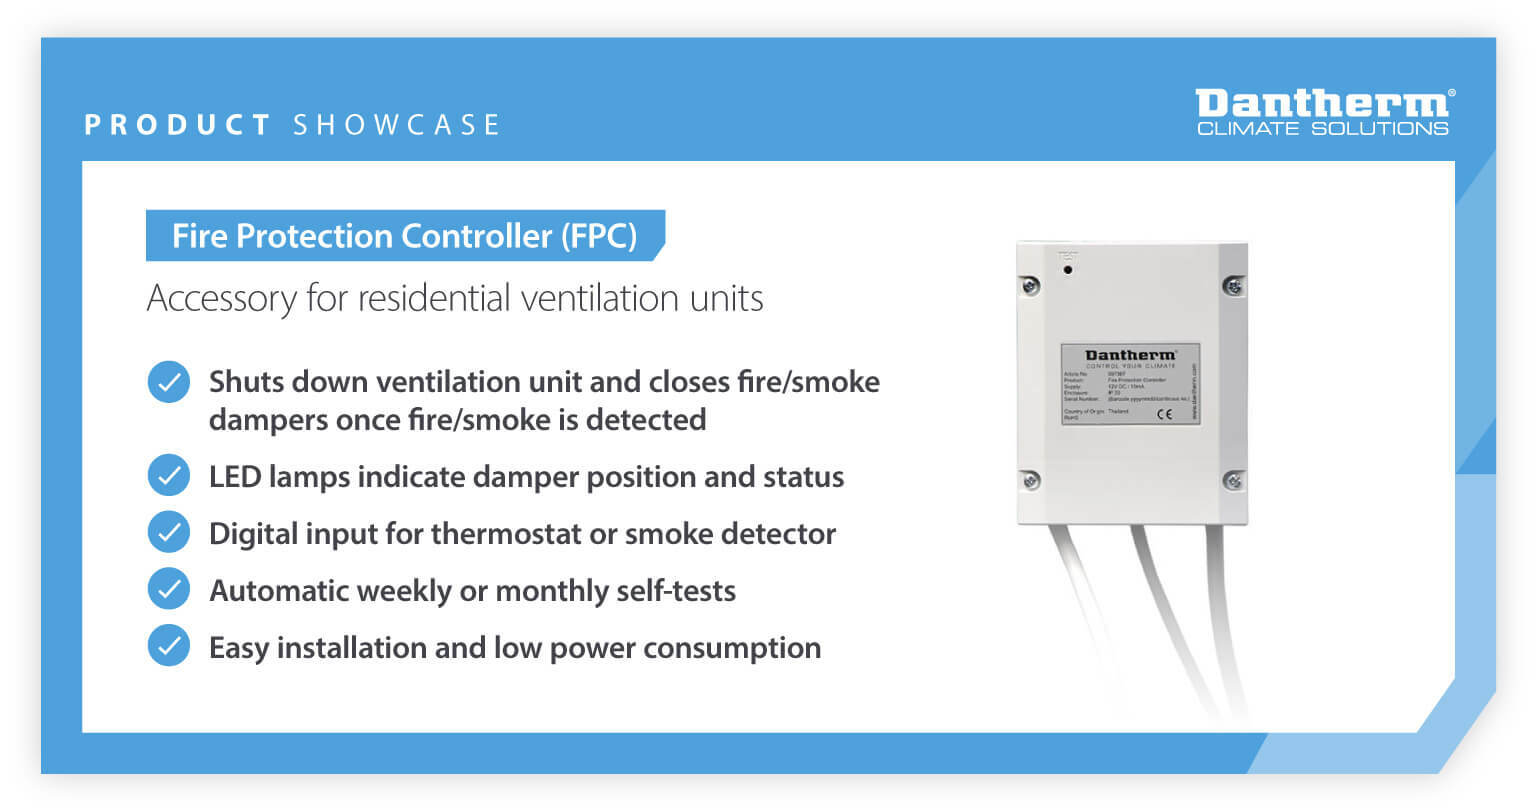 Product showcase of FPC (Fire Protection Controller) used with ventilation units - infographic image